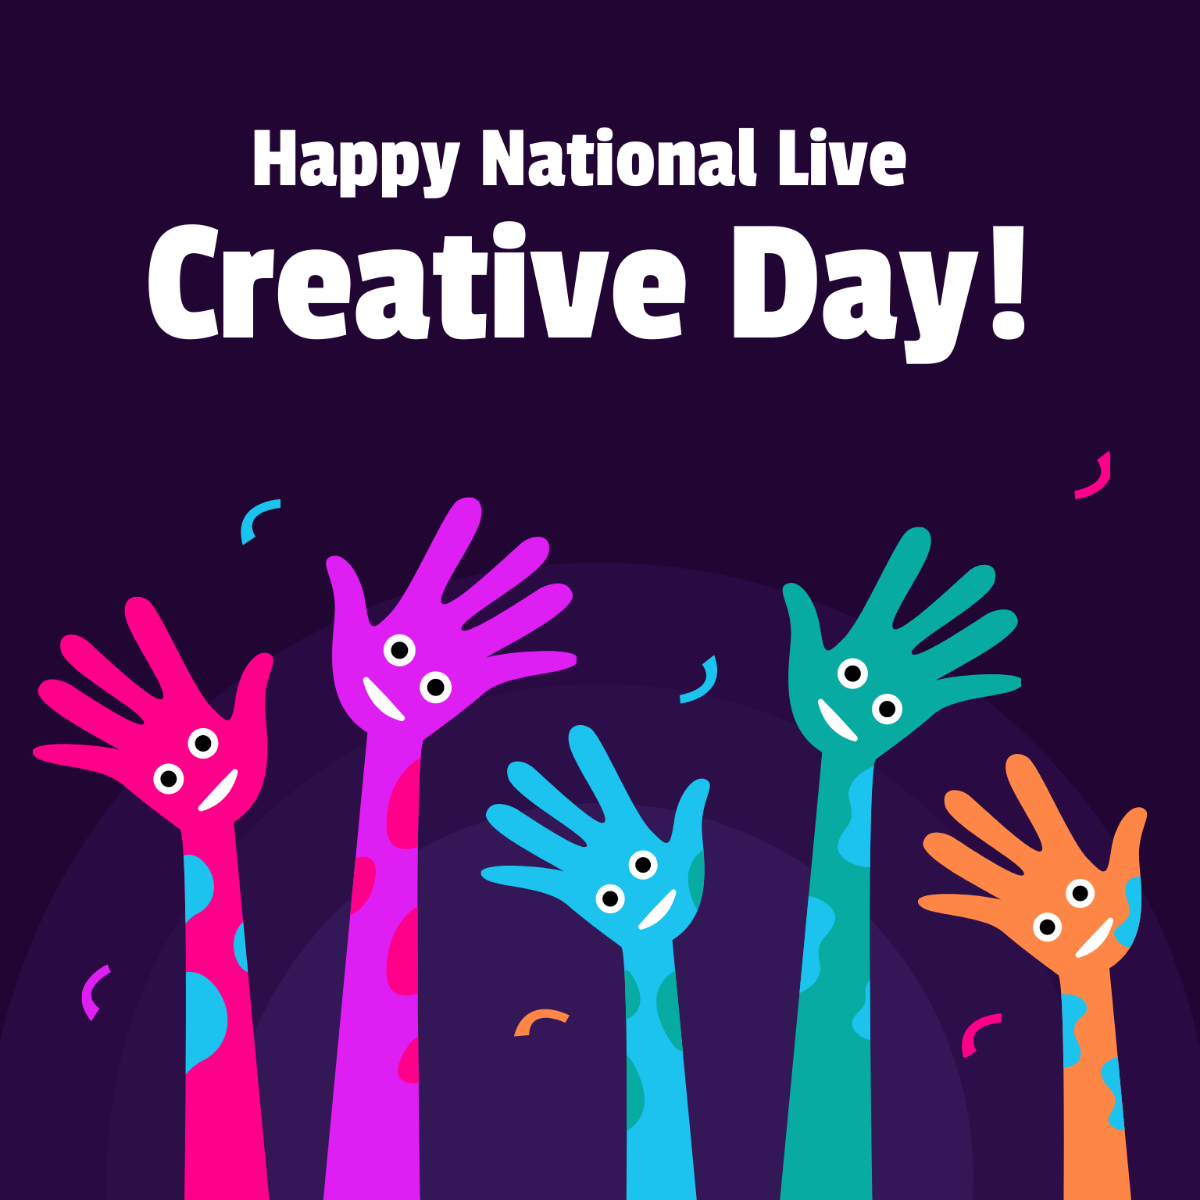 National Live Creative Day Poster Vector Template